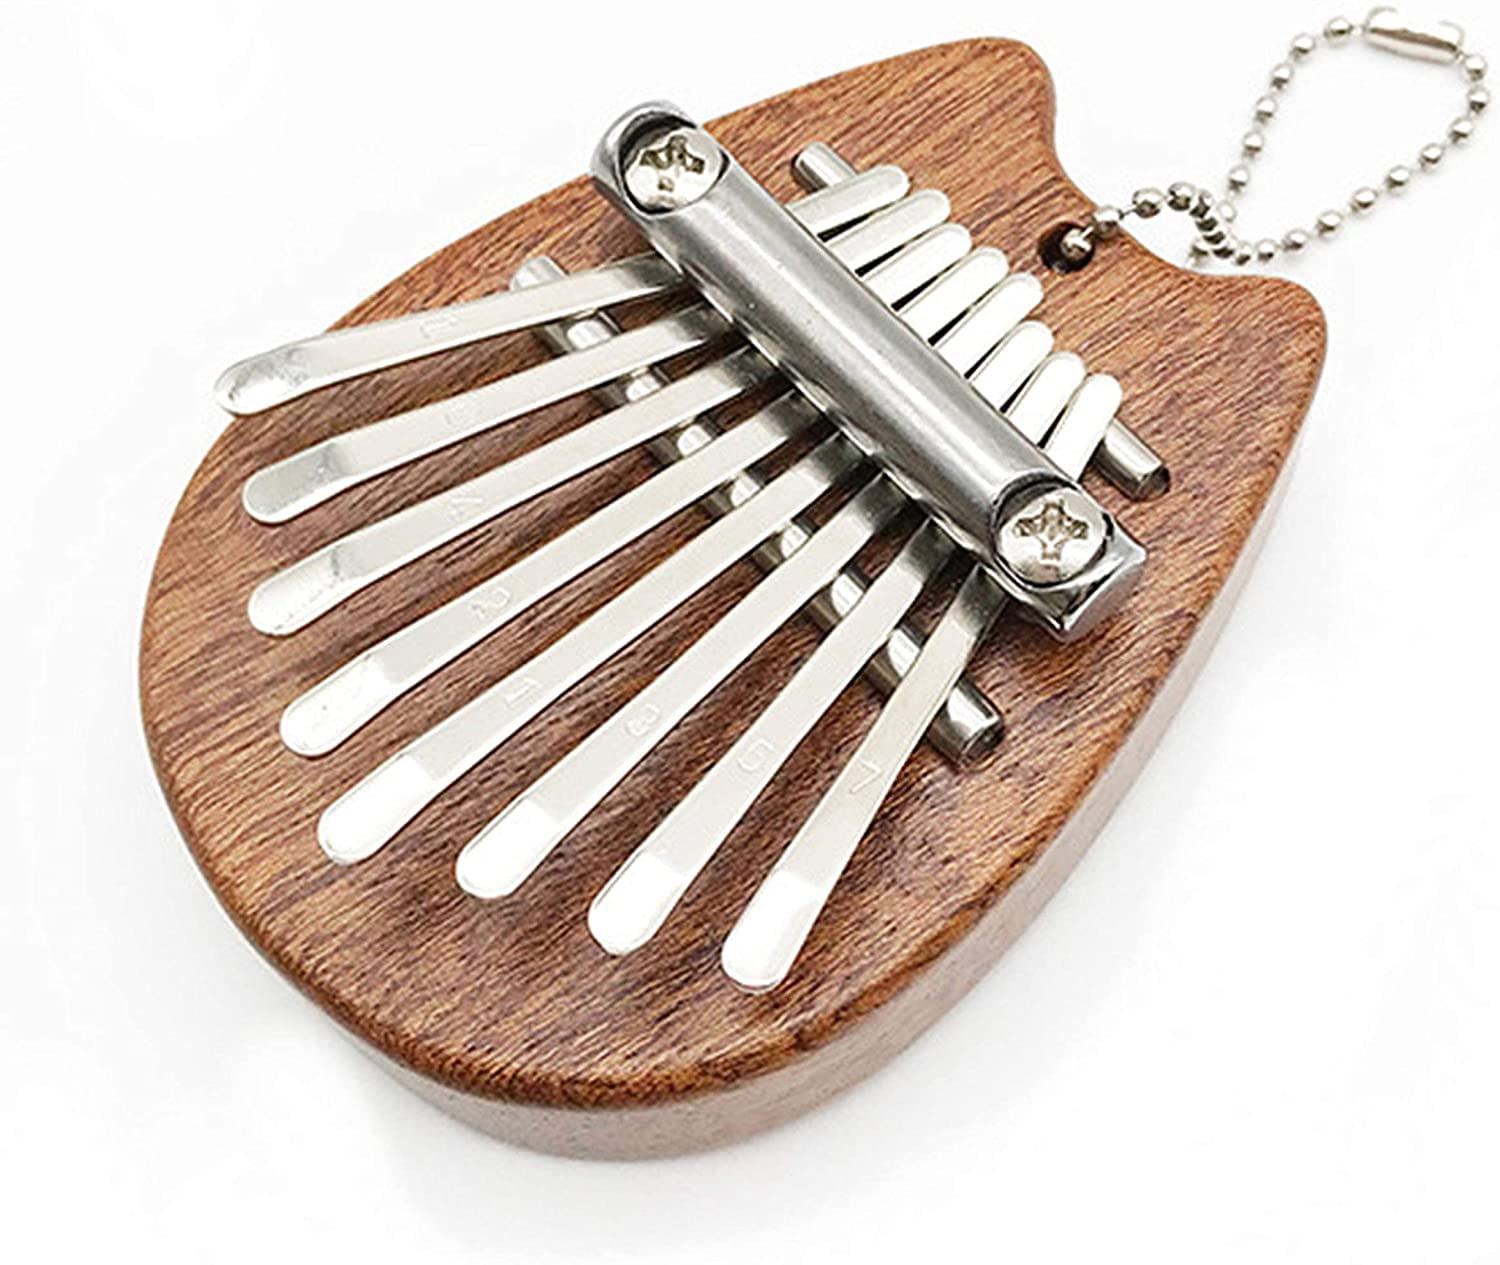 Ganasome 8 Key Mini Kalimba exquisite Finger Thumb Piano Marimba Musical good accessory Pendant Gift for Kids and Adults Beginners Square 